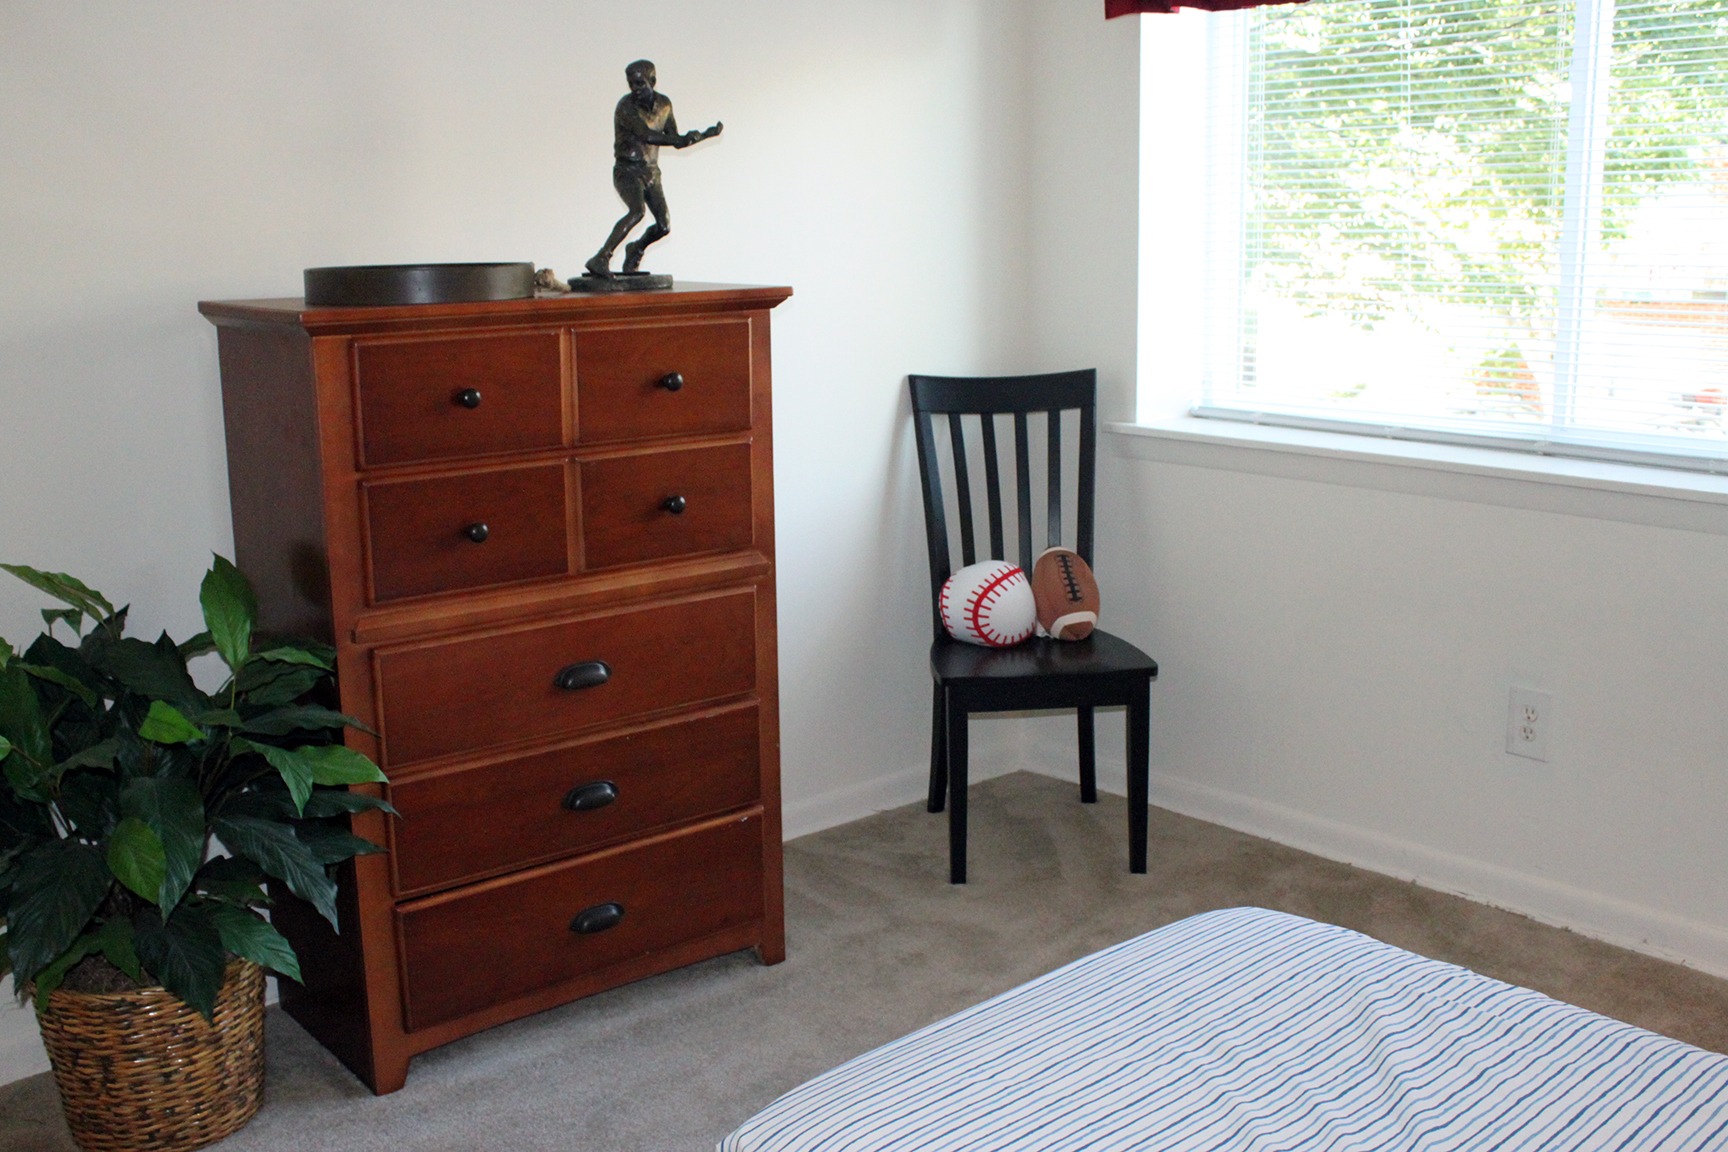 The bedroom area of an apartment, fitted with a Chester drawer, a chair, and a huge window